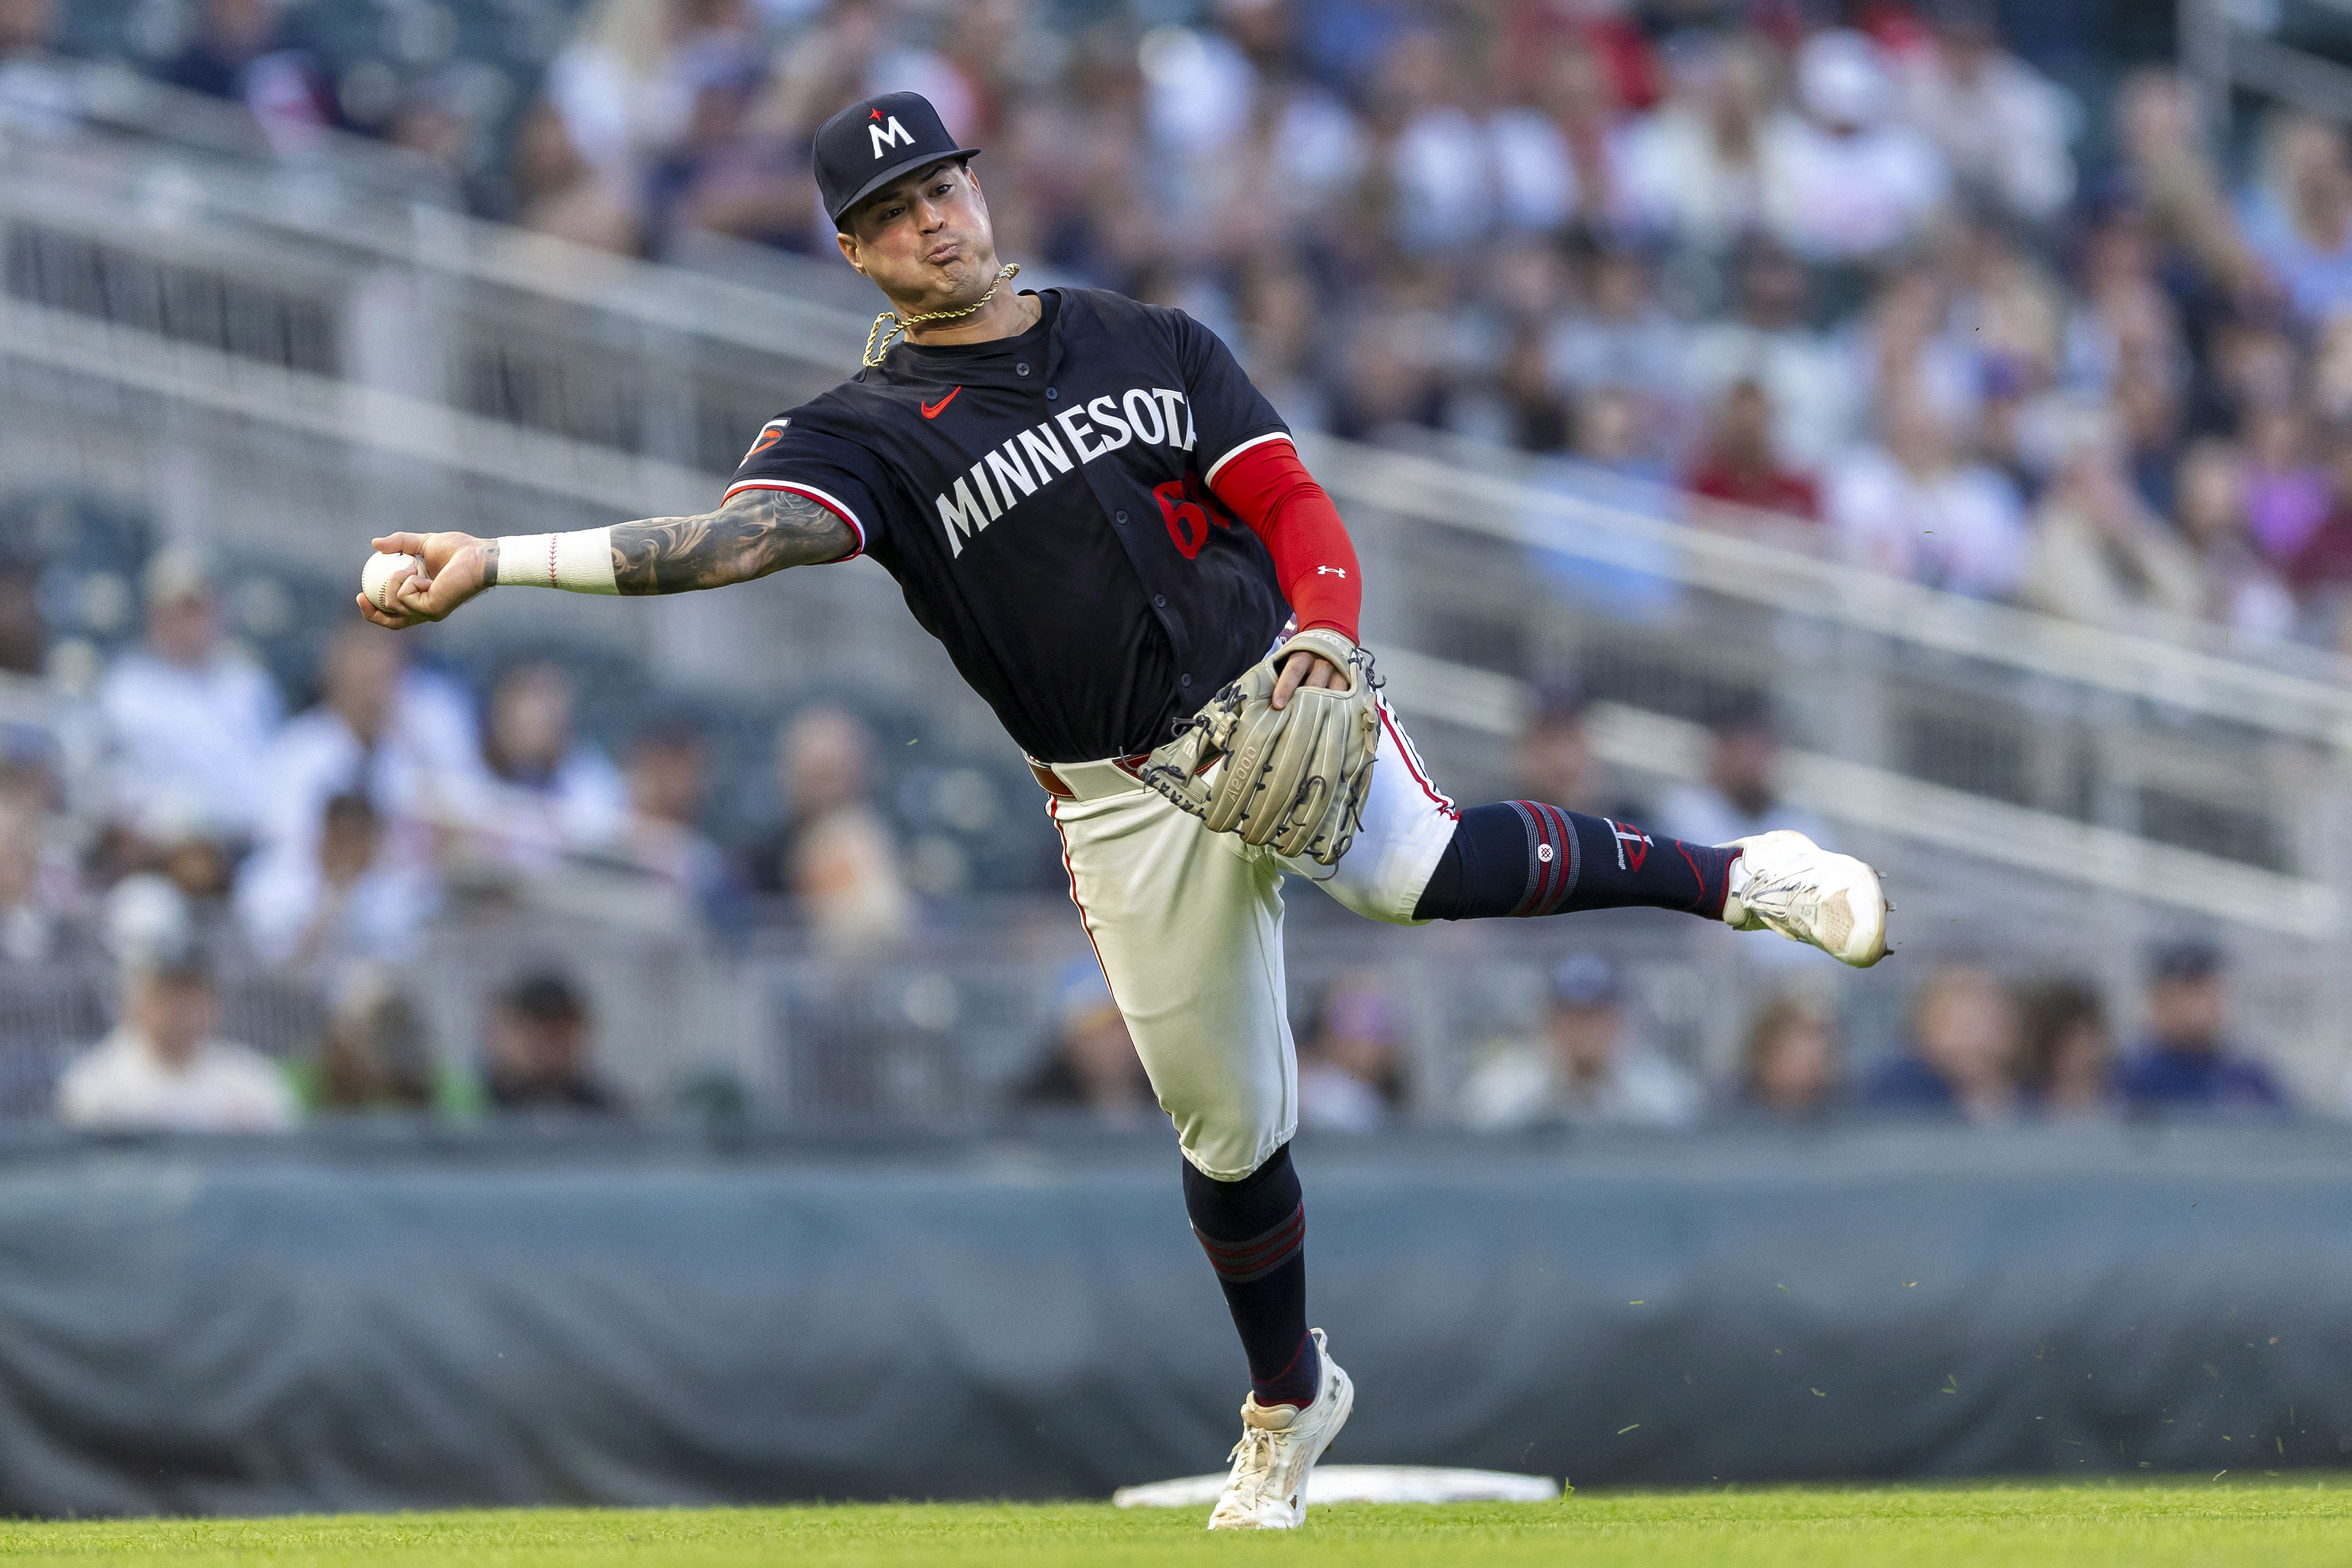 Twins starter Paddack tagged early in 5-1 series-opening loss to Yankees